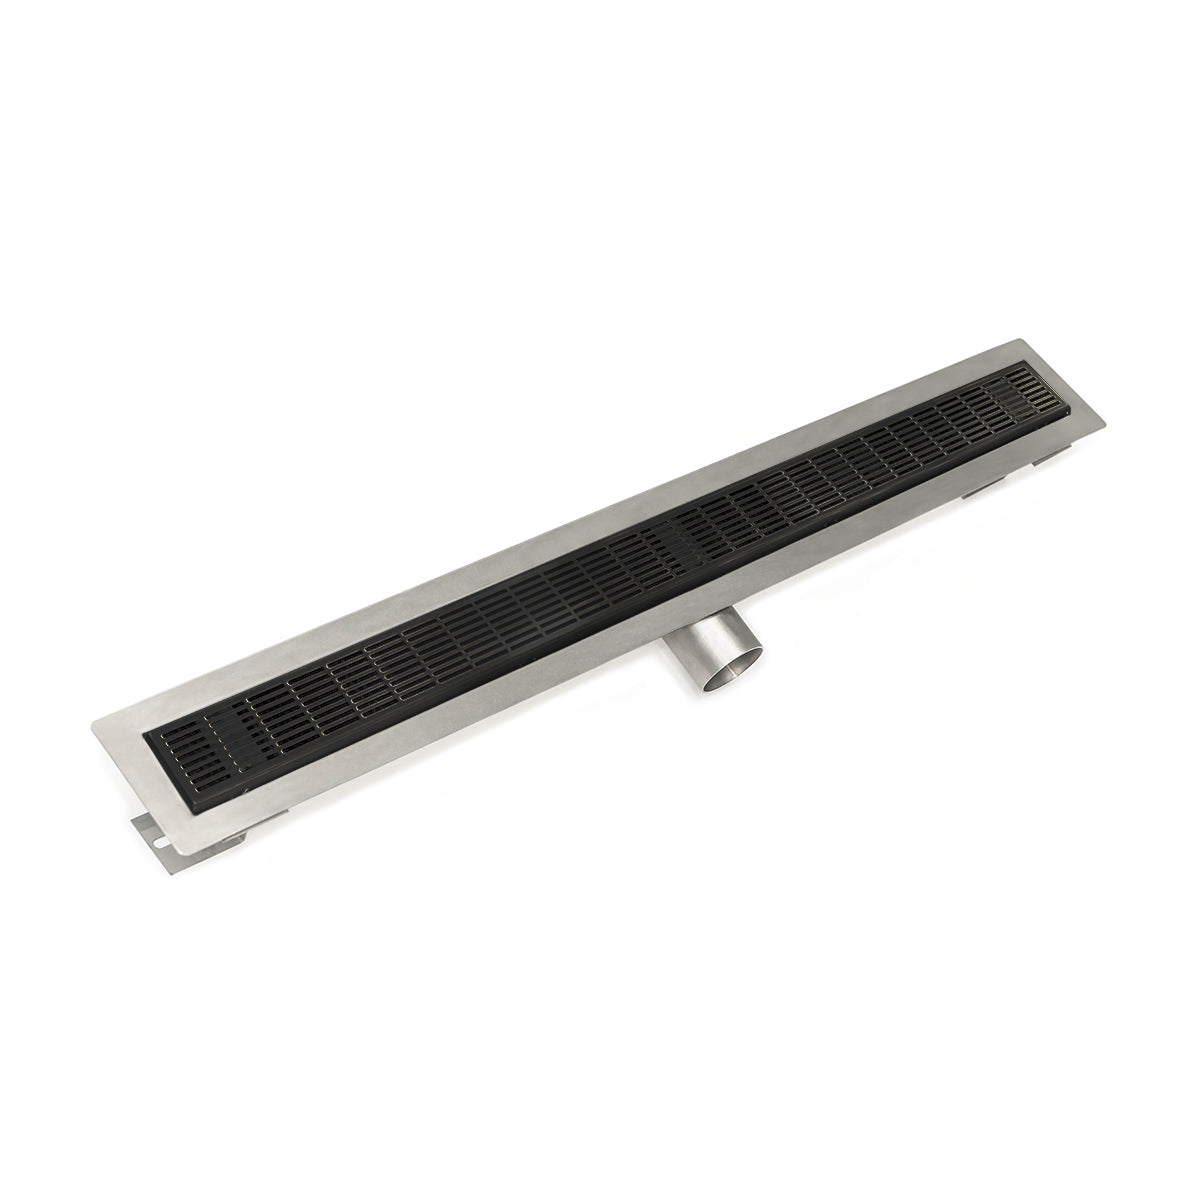 Infinity Drain 36" FT Series Side Outlet Linear Drain Kit with 2 1/2" Perforated Slotted Grate